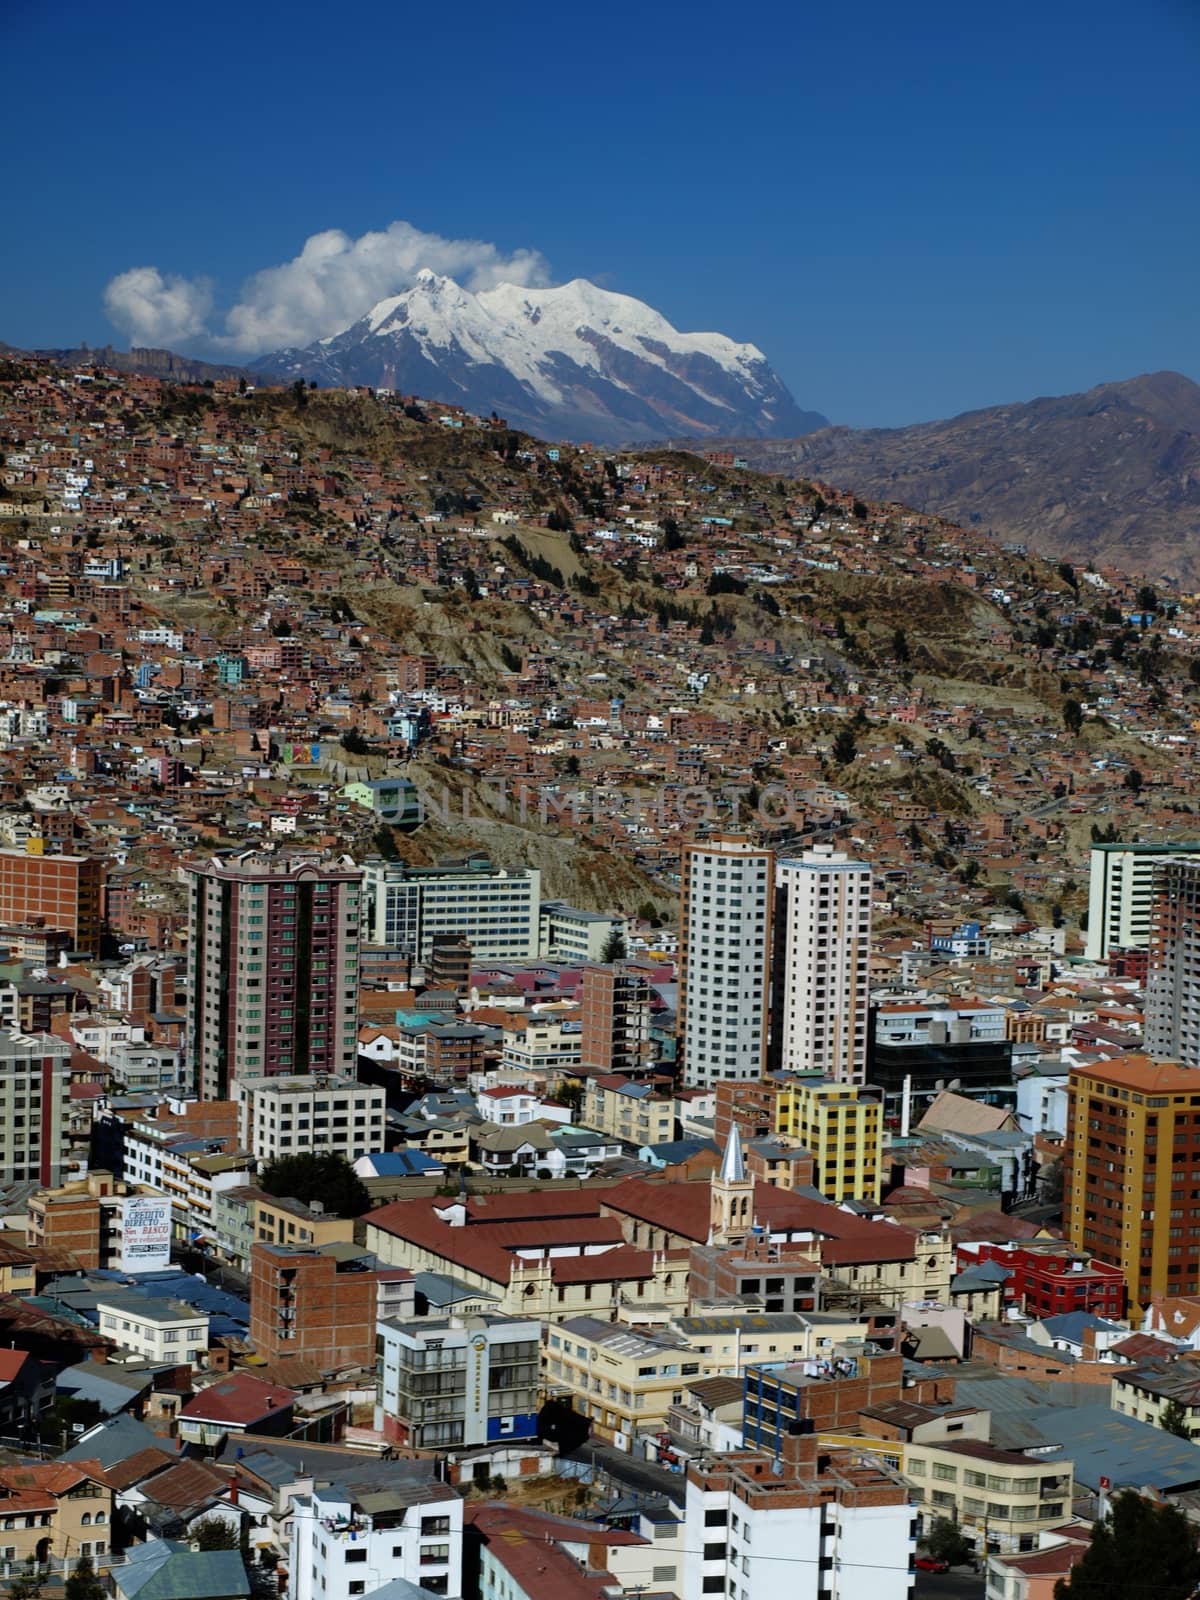 La Paz and Illimani mountain   by pyty